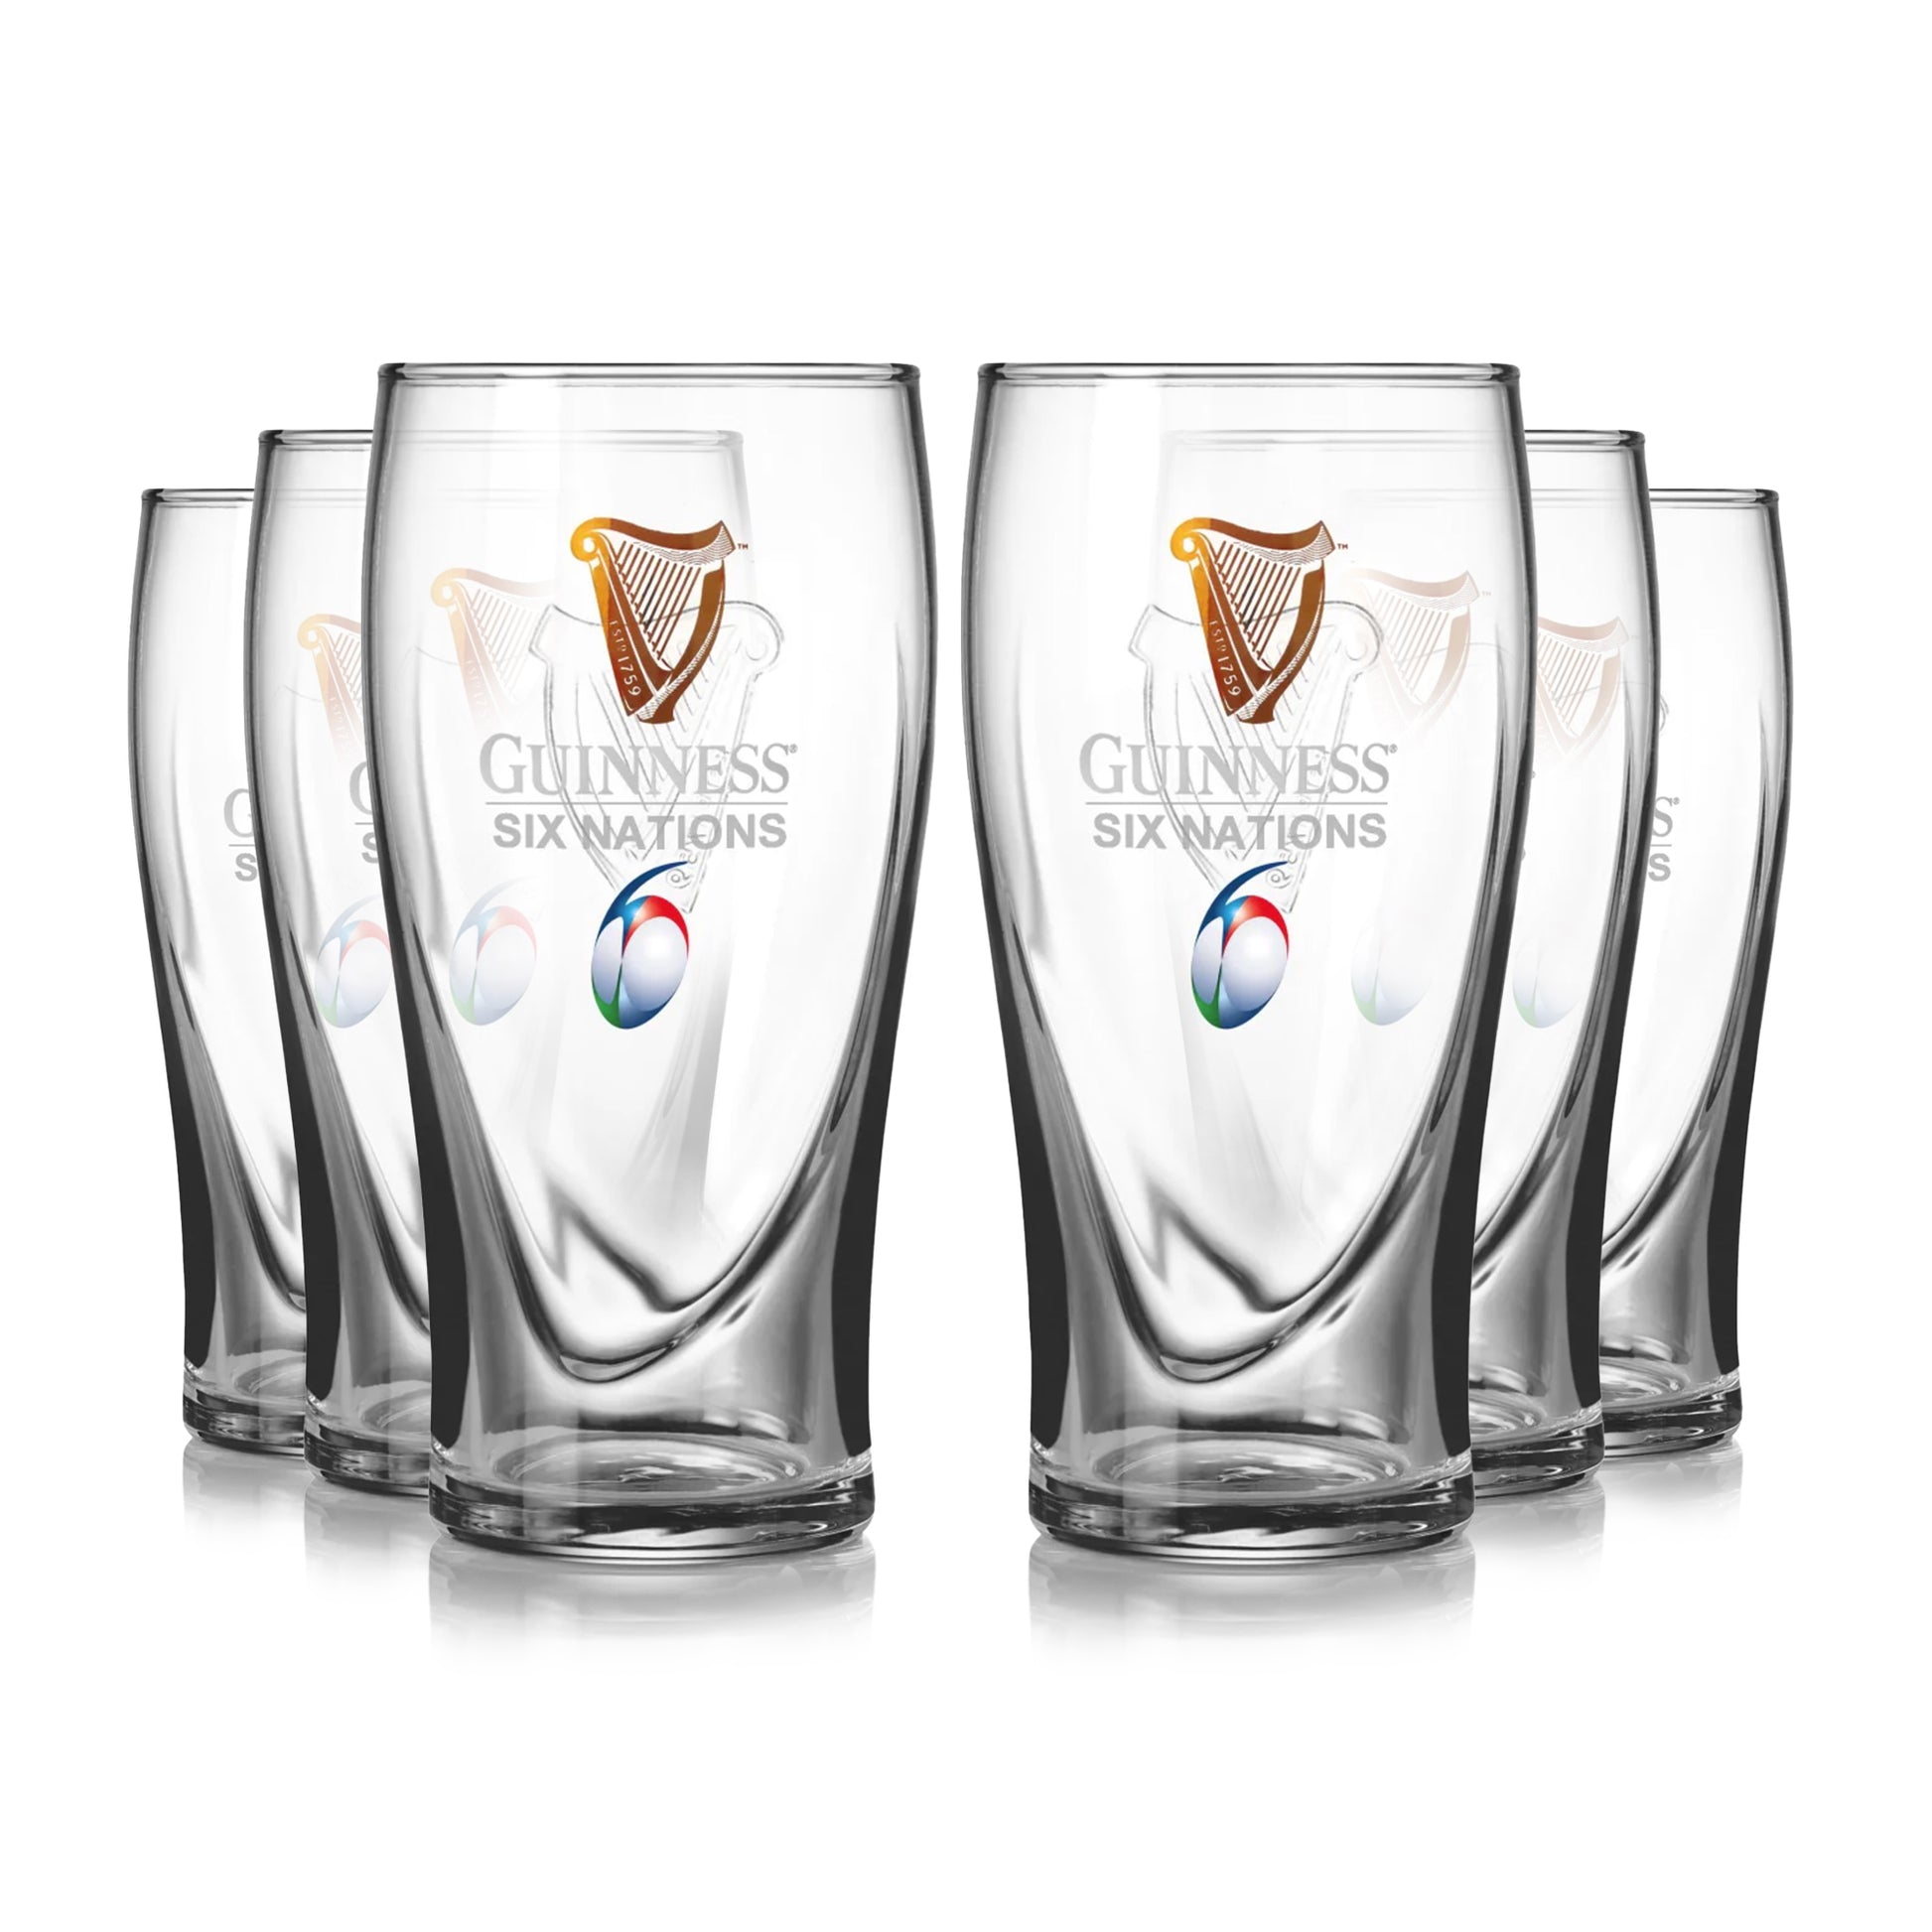 Six Guinness UK Six Nations Pint Glasses - 6 Pack on a white background.